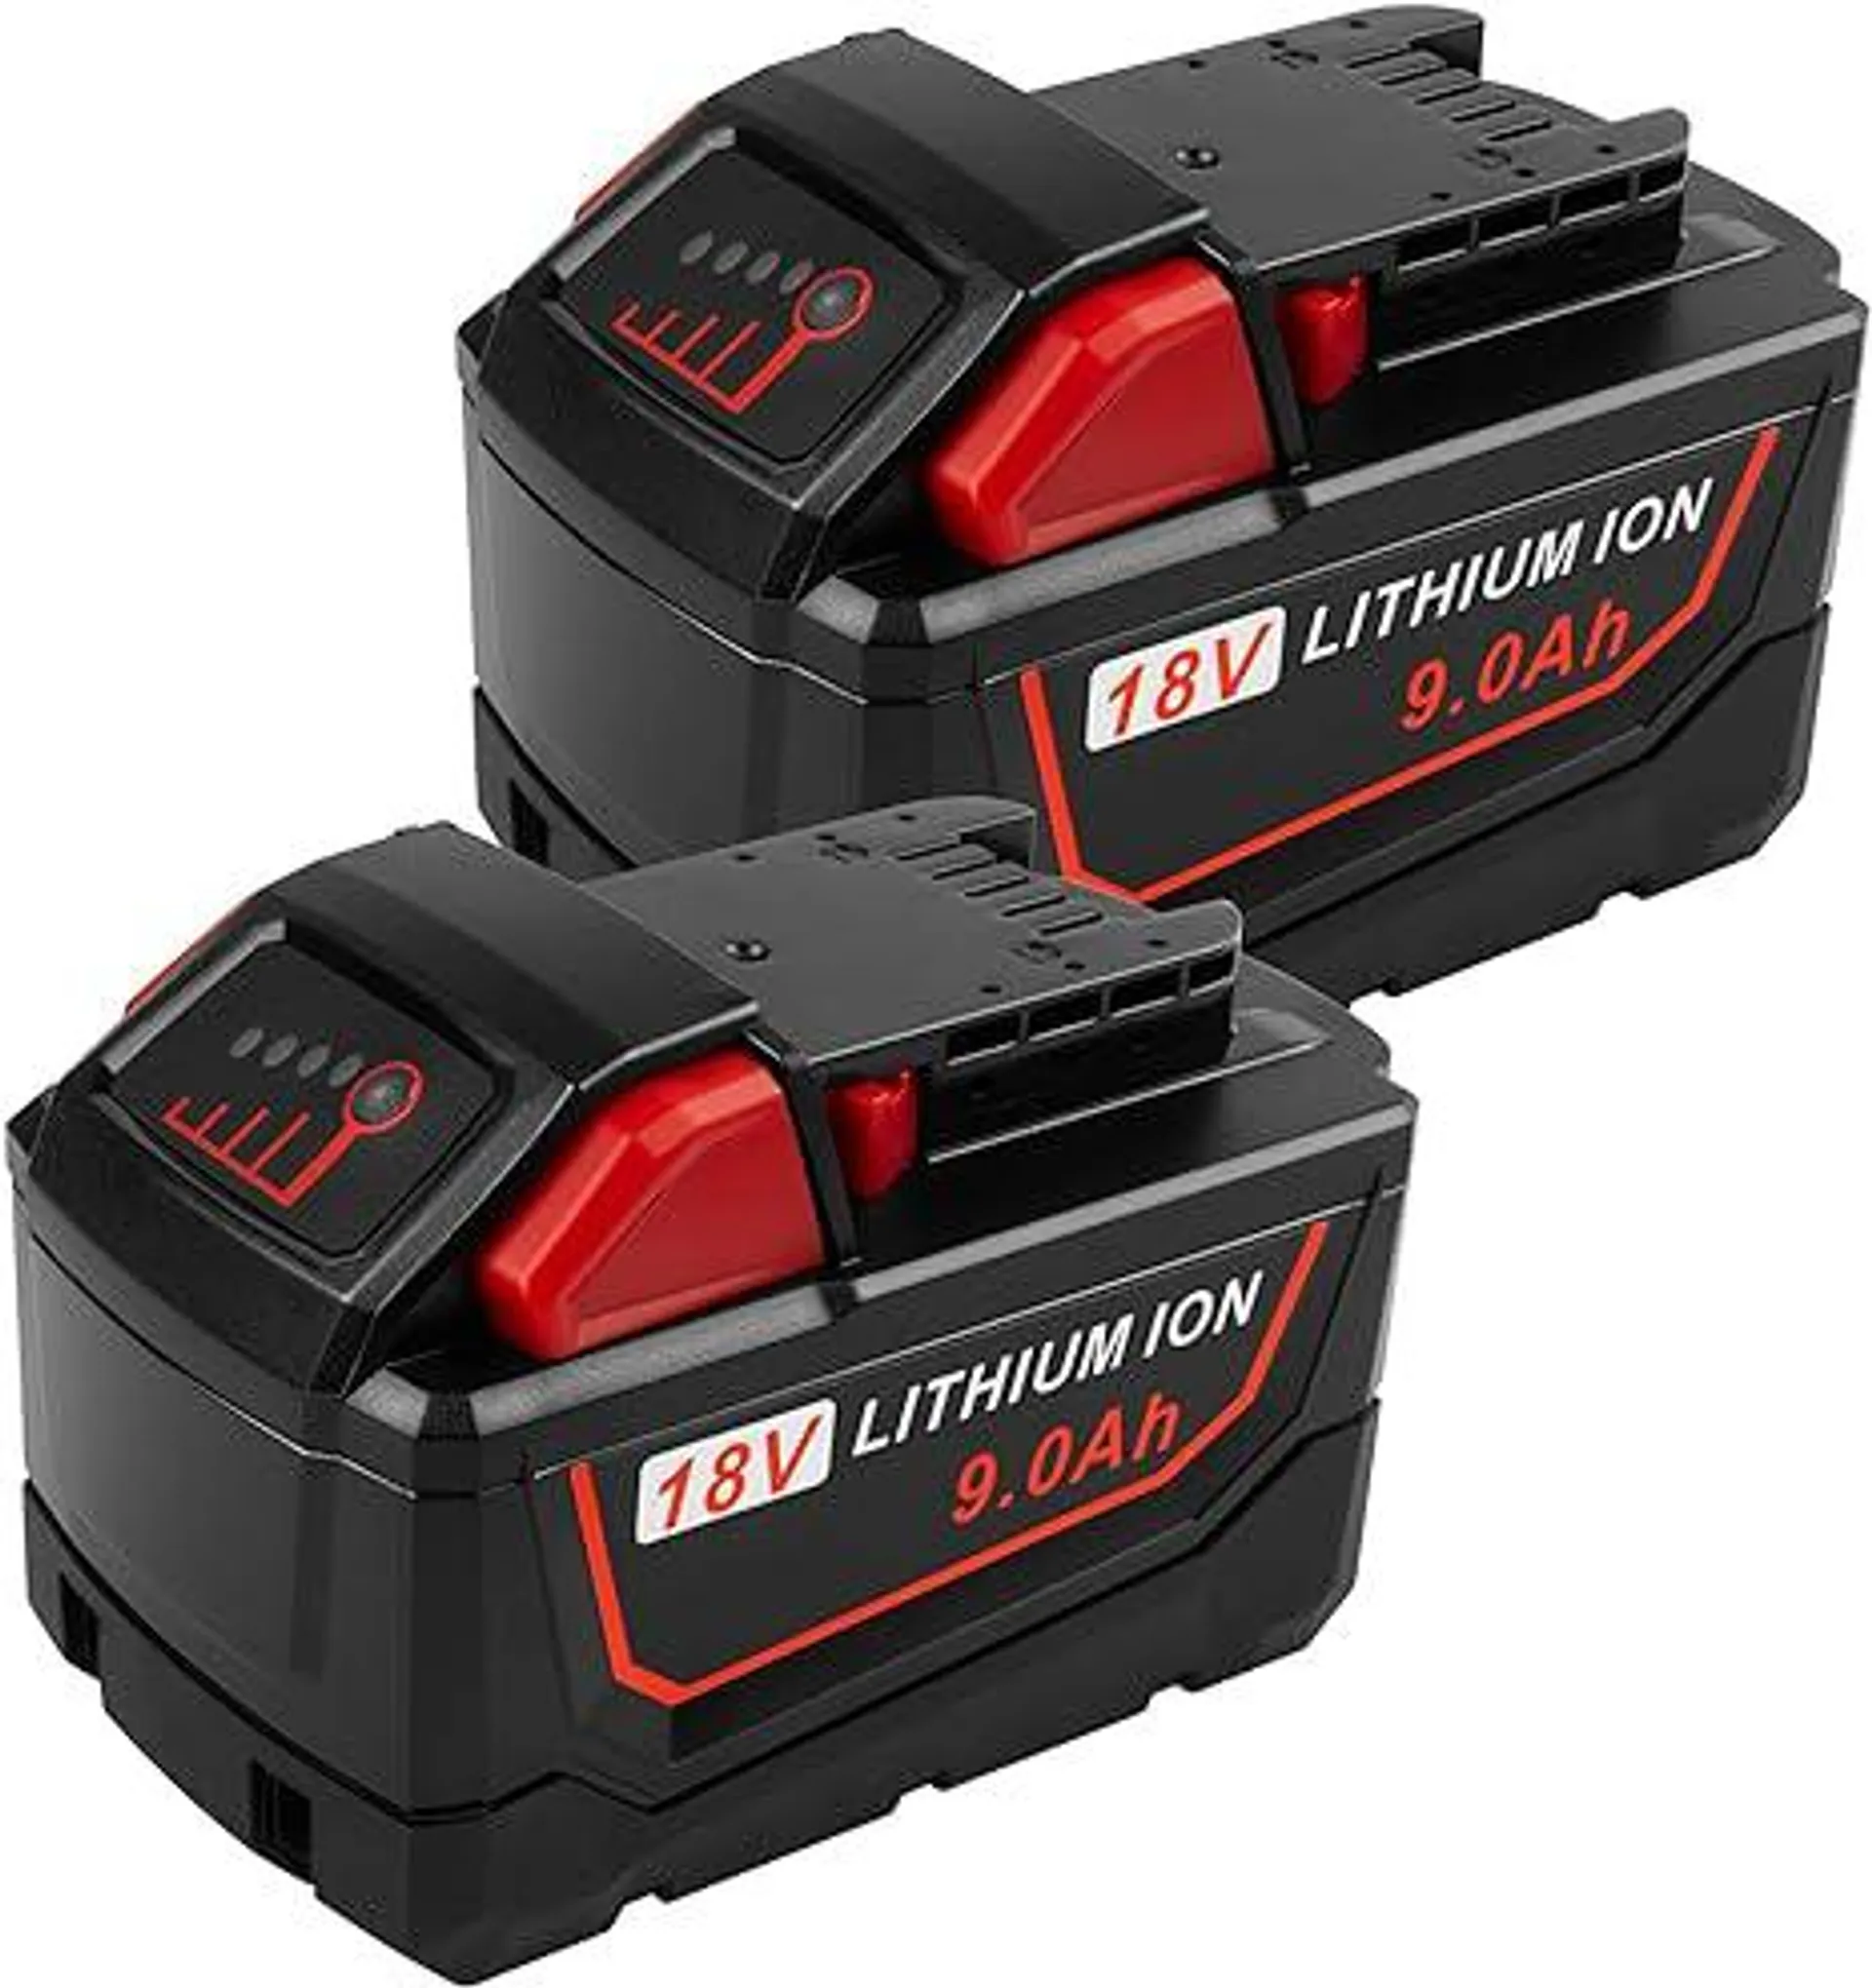 Cukect 9.0Ah 18V Replace for Milwaukee M18 Battery Compatible with 48-11-1850 48-11-1860 48-11-1845 48-11-1828 Cordless Power Tools Lithium Battery, 2Pack